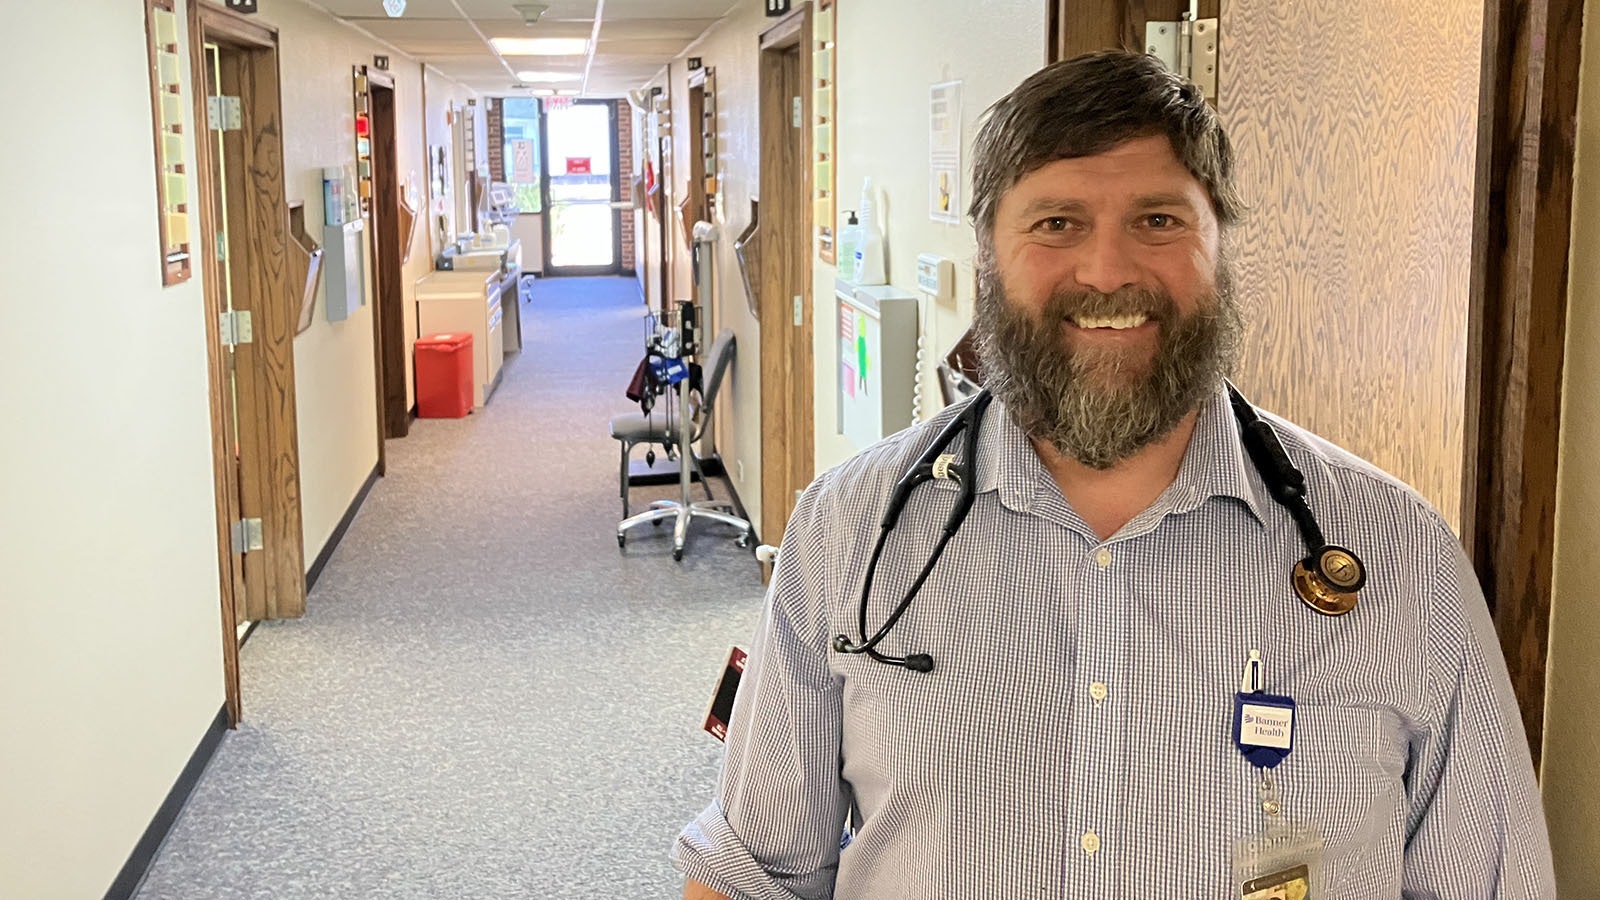 Second-year resident Dr. Alex Bergeron appreciates the rigorous training and plans to practice in Casper when he launches his professional career.